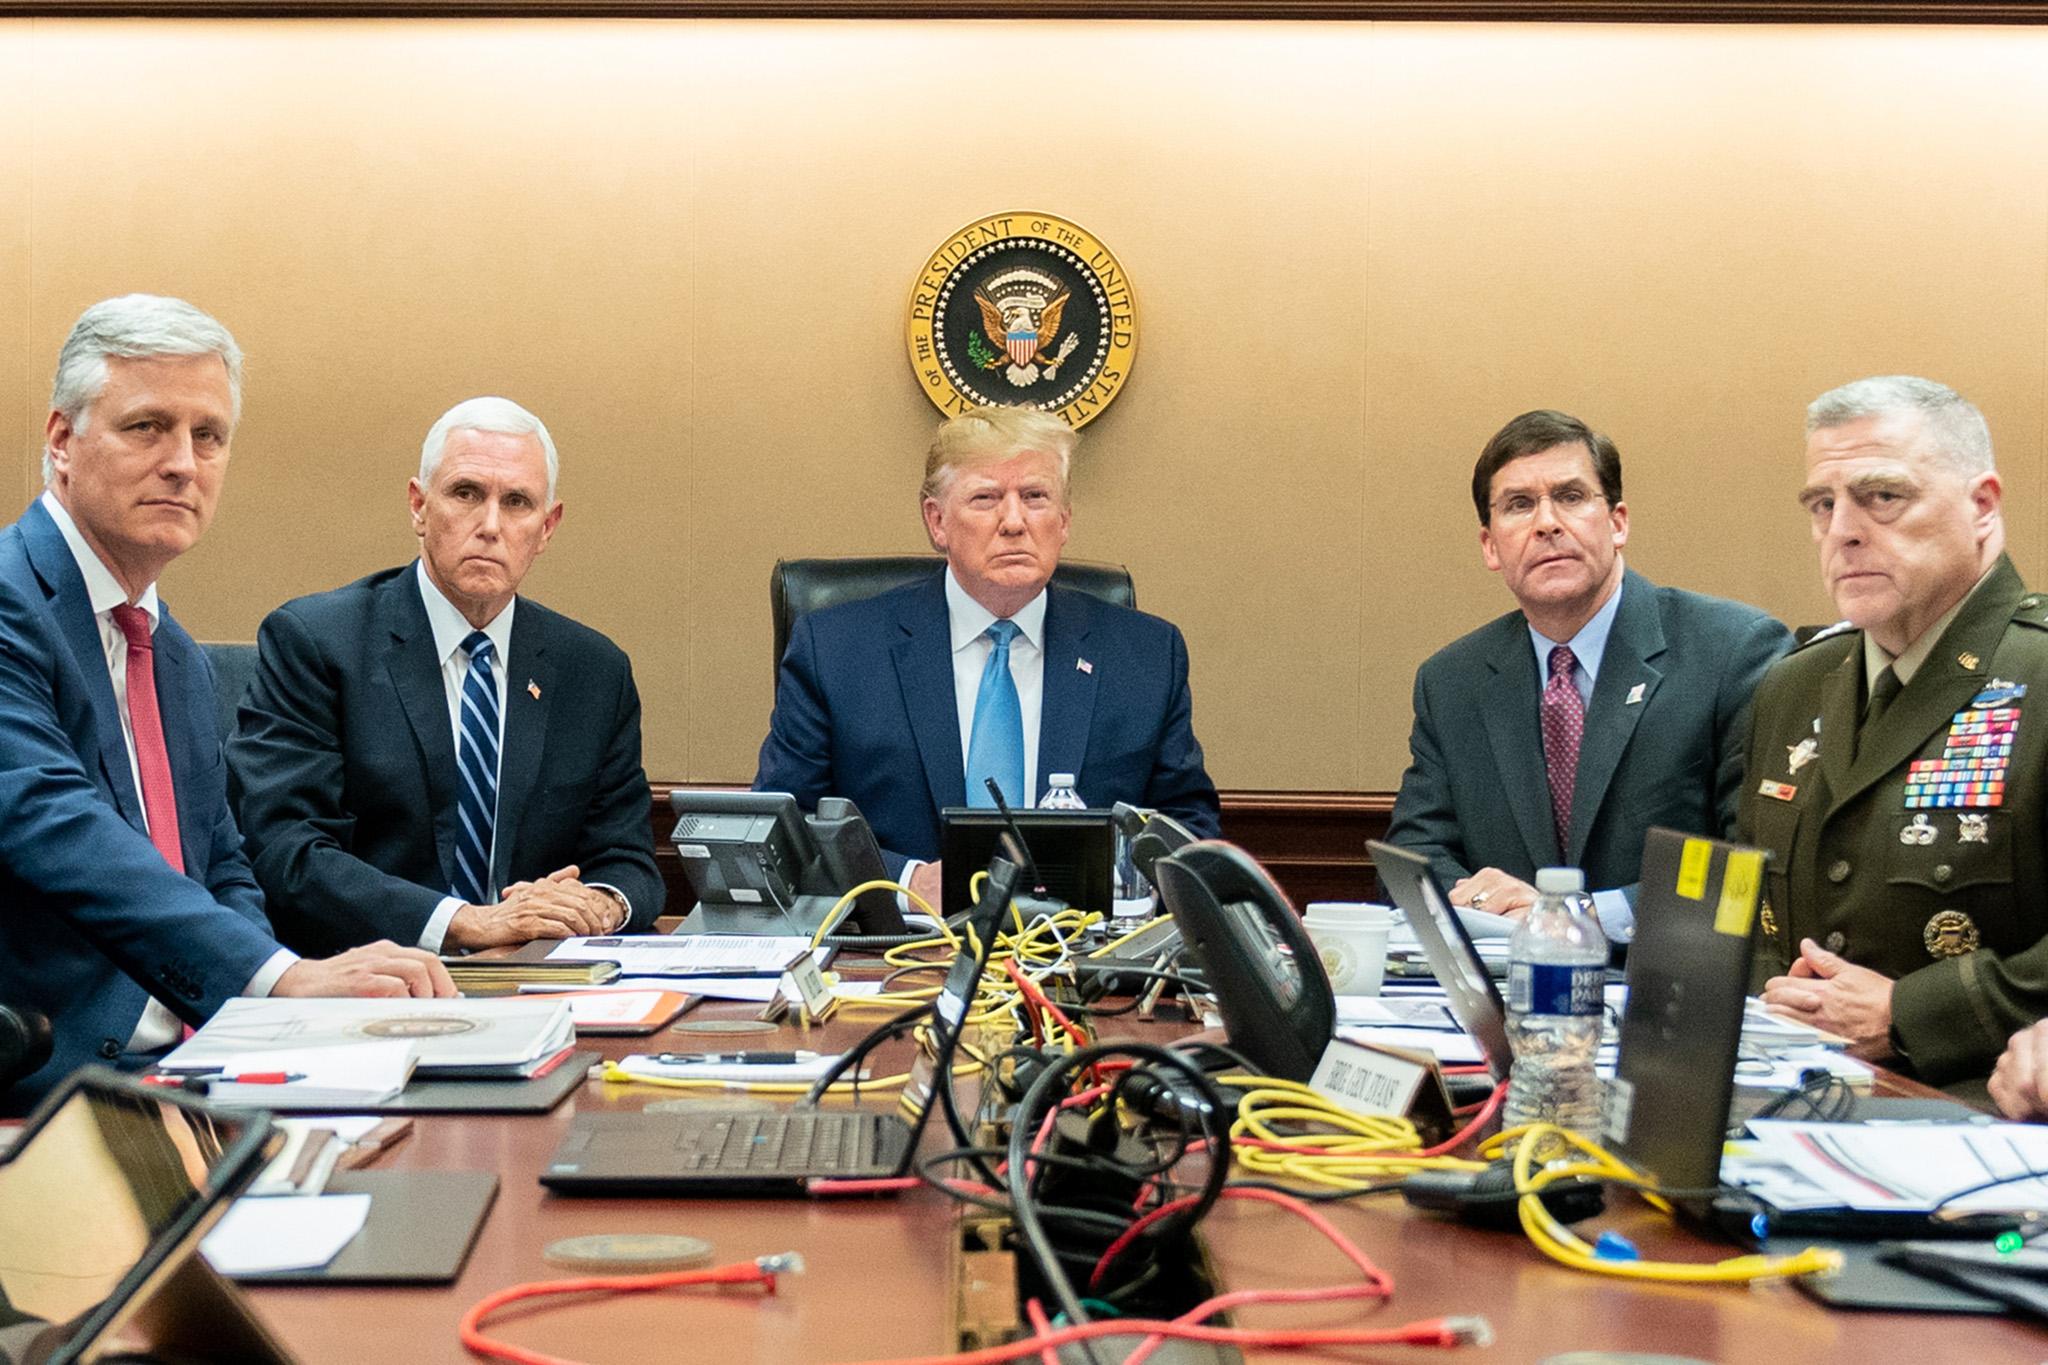 Donald Trump with Mike Pence, Robert O’Brien, Mark Esper, and Mark Milley watching raid that resulted in death of Abu Bakr al-Baghdadi